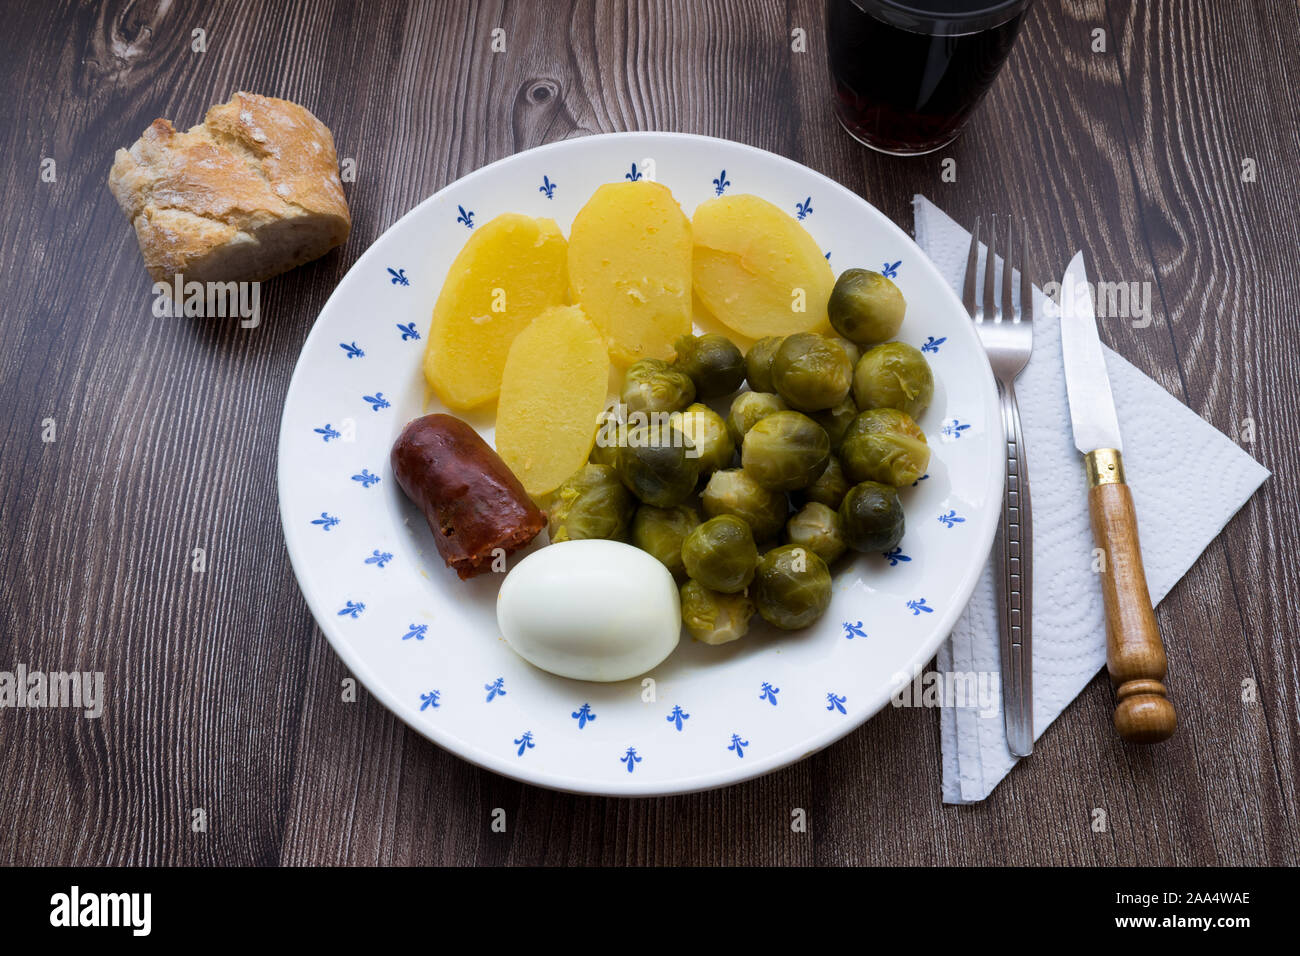 Plate with brussel sprouts, sausage, cooked potatoes and egg on a wooden table. Traditional Spanish food Stock Photo